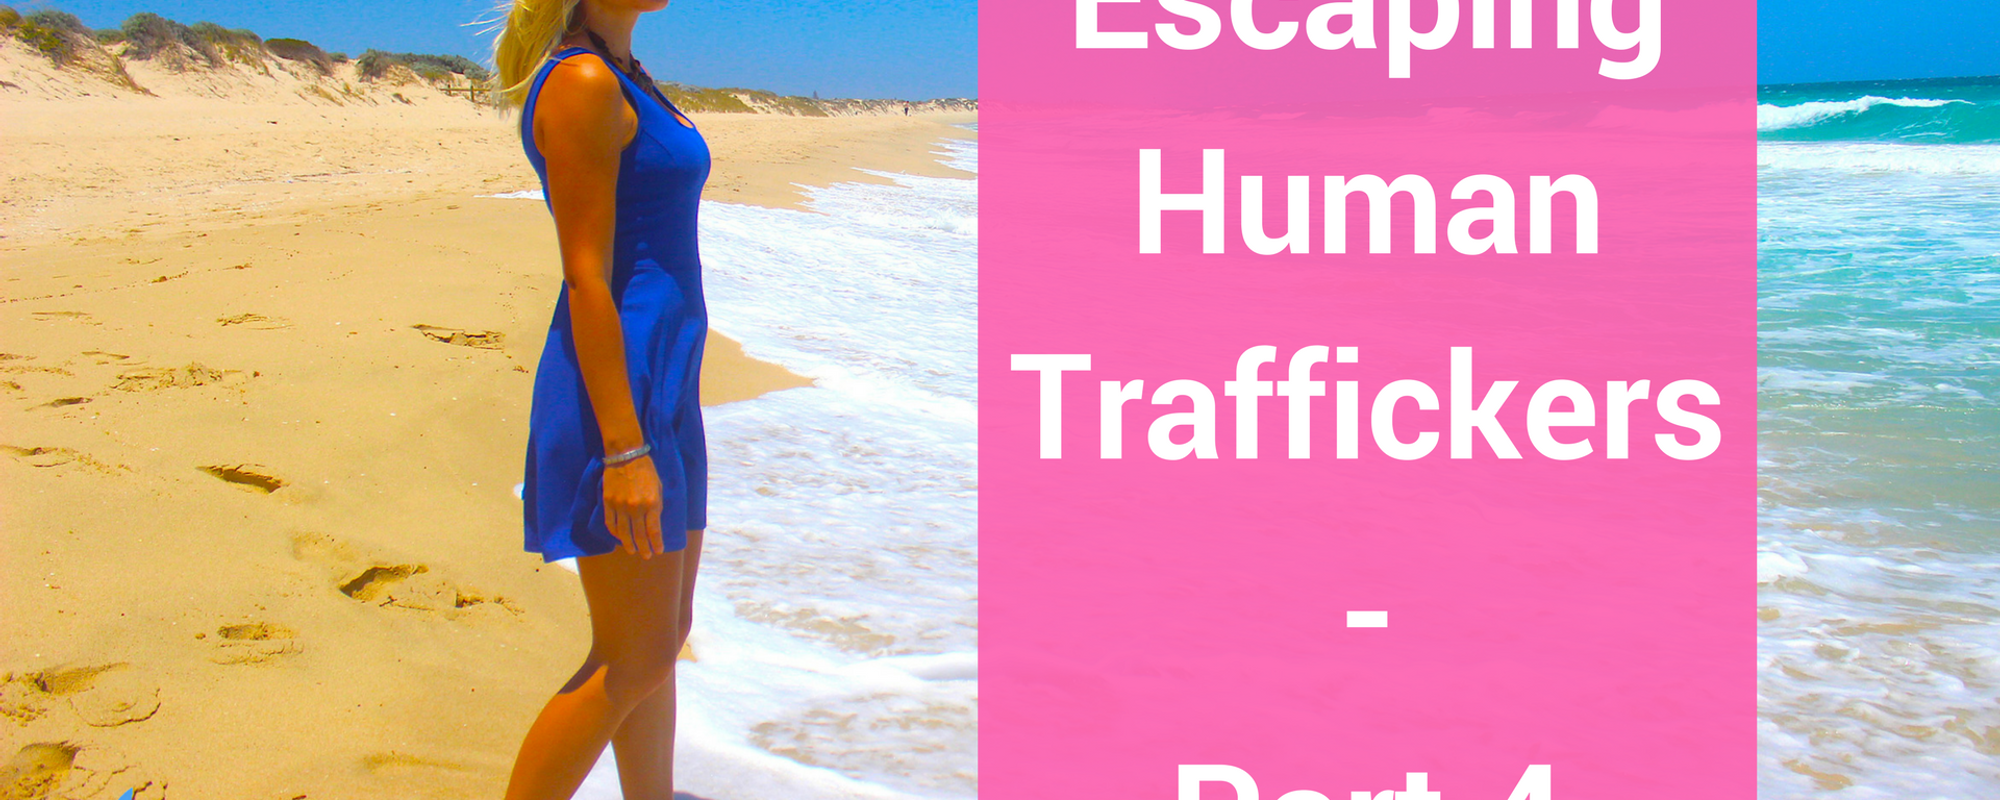 How I Escaped Human Traffickers at The Cambodian / Thai Border - Part 4